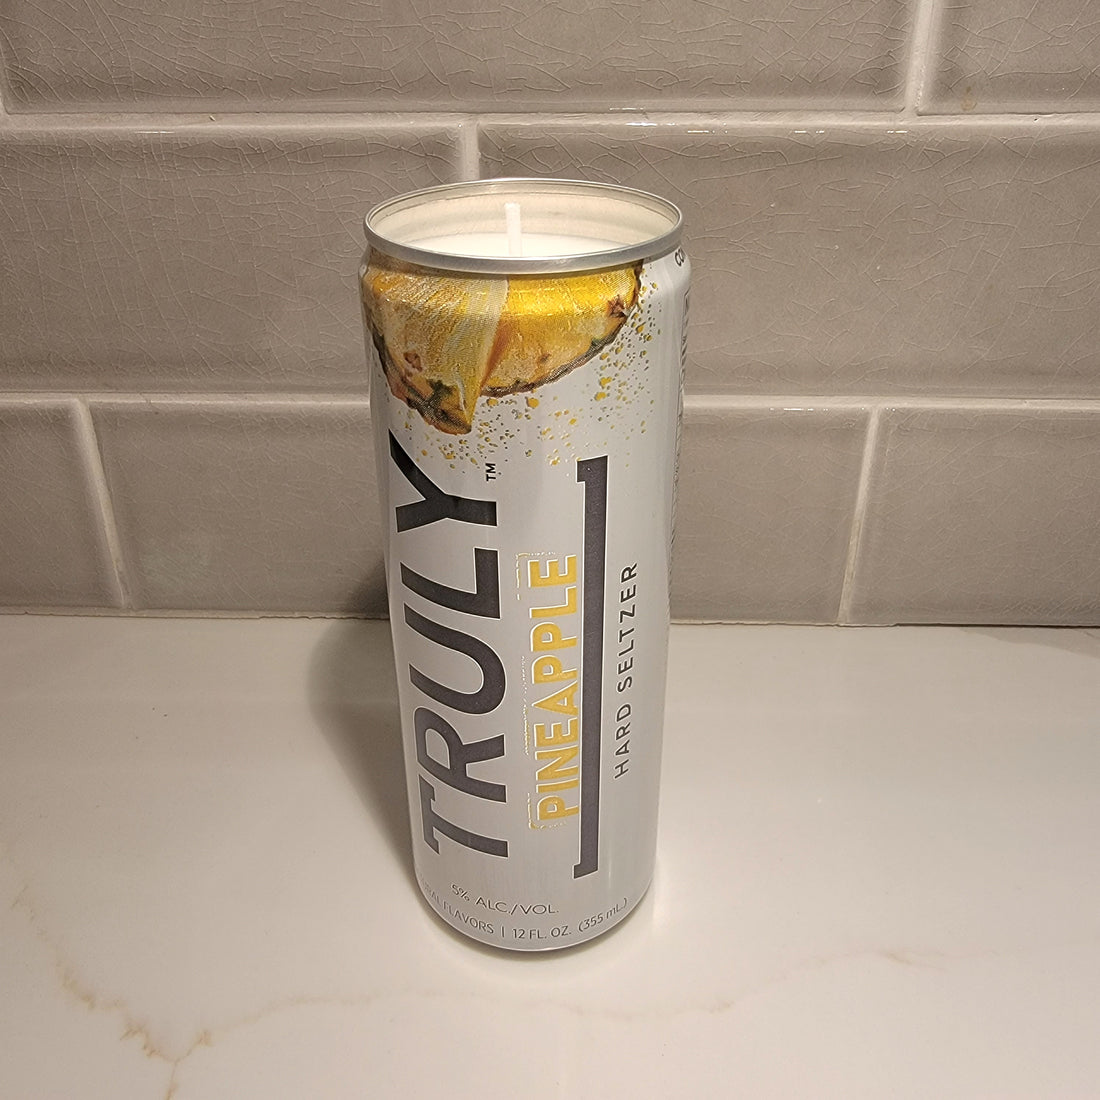 Truly Pineapple Hard Seltzer Candle - Pineapple Sage Scent